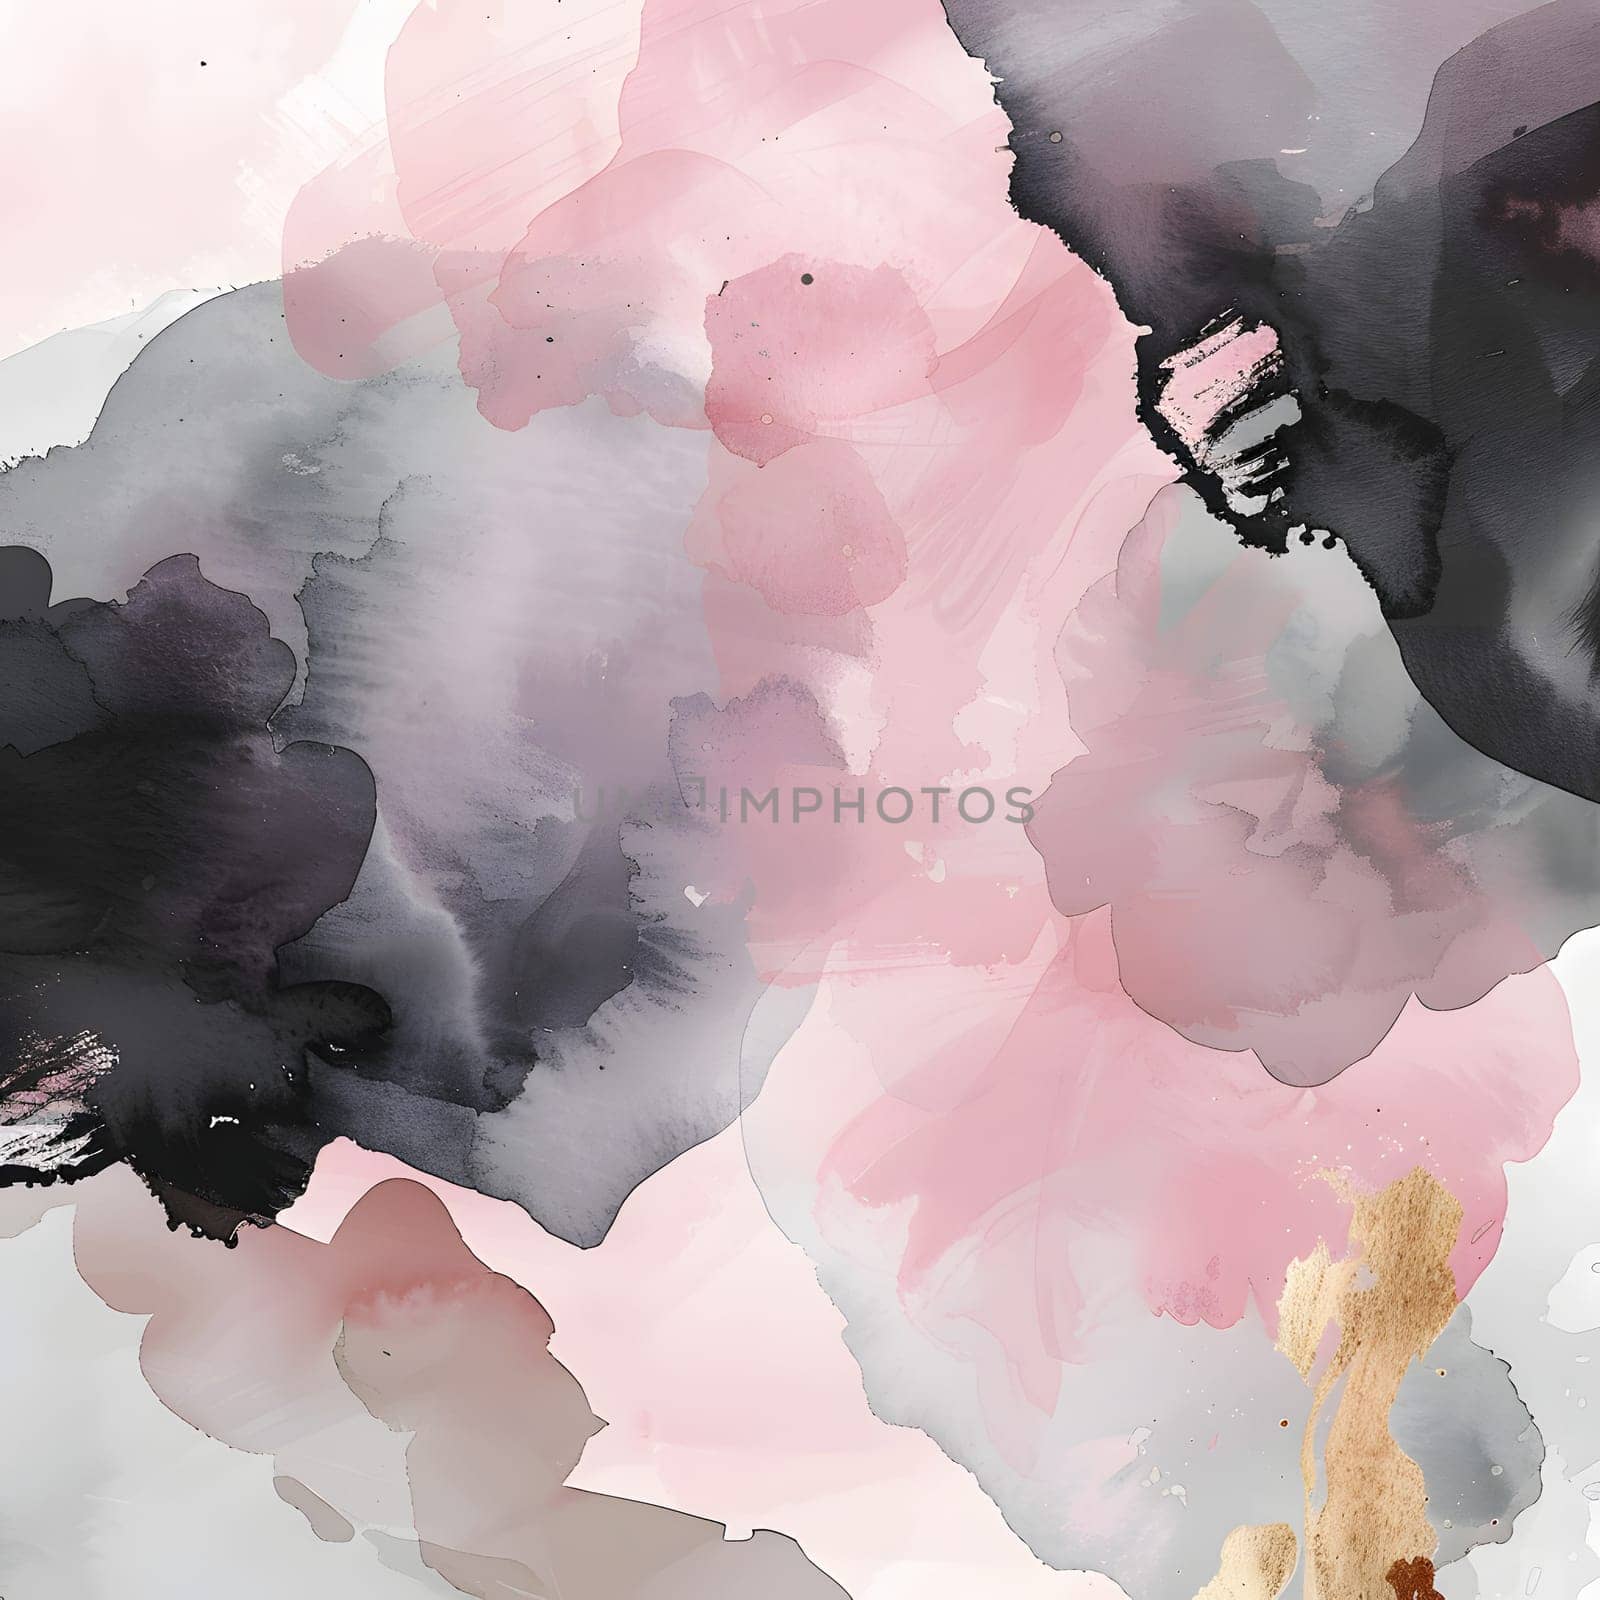 An atmospheric phenomenon captured in a closeup watercolor painting featuring pink and black flowers with magenta petals, showcasing the artists skill in using watercolor paint